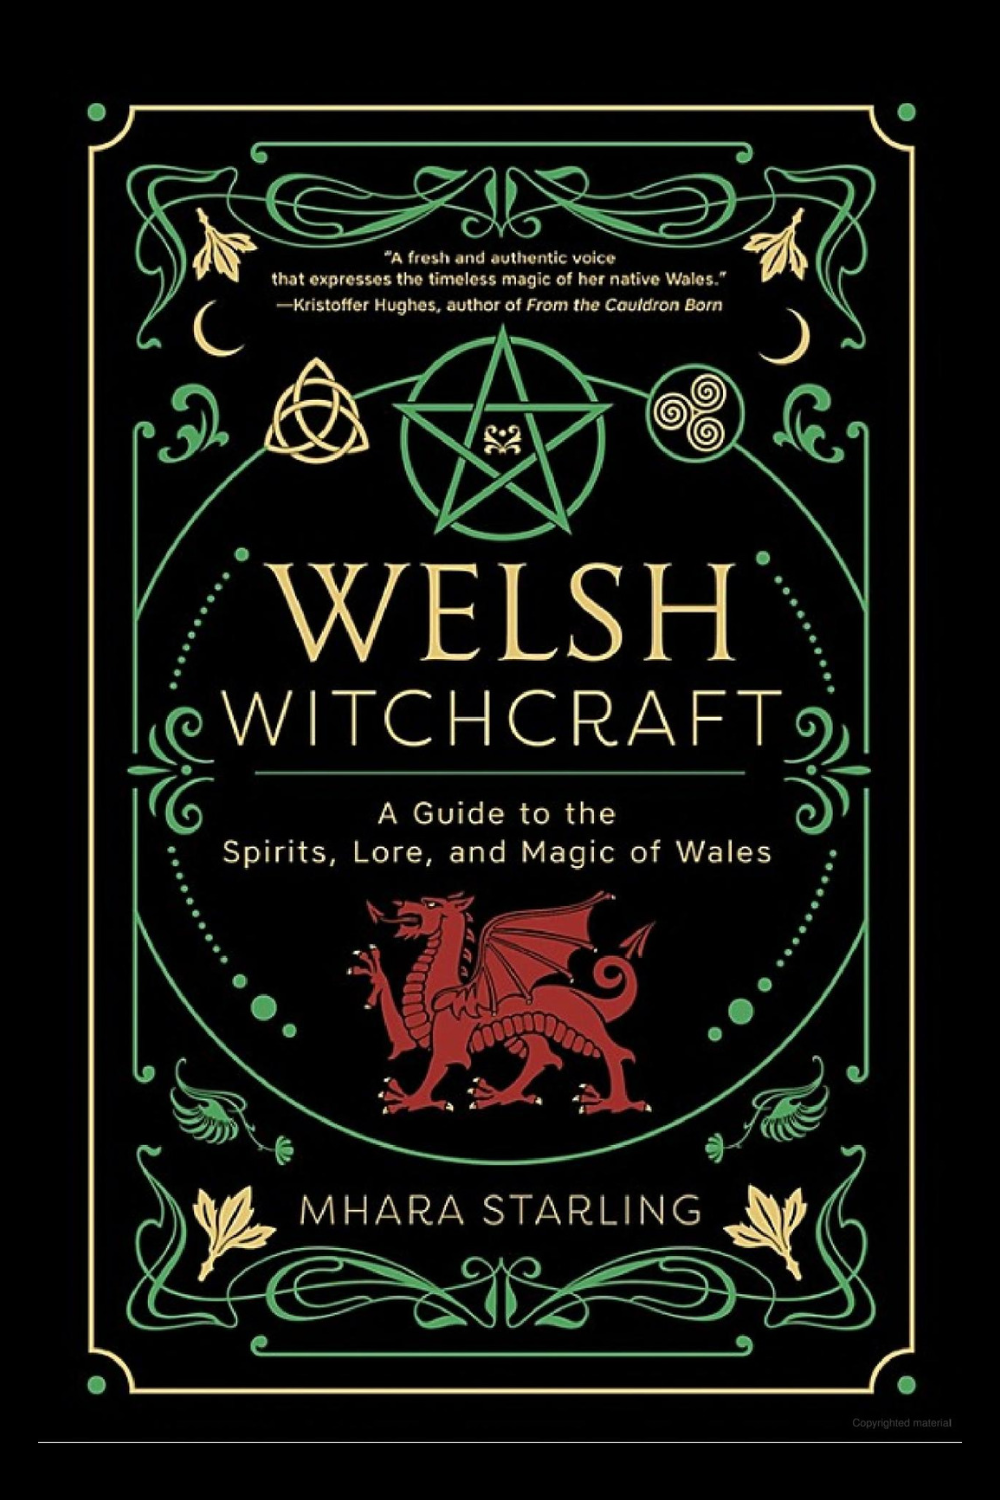 Welsh Witchcraft : A Guide to the Spirits, Lore and Magic of Wales - By Mhara Starling (Paperback)